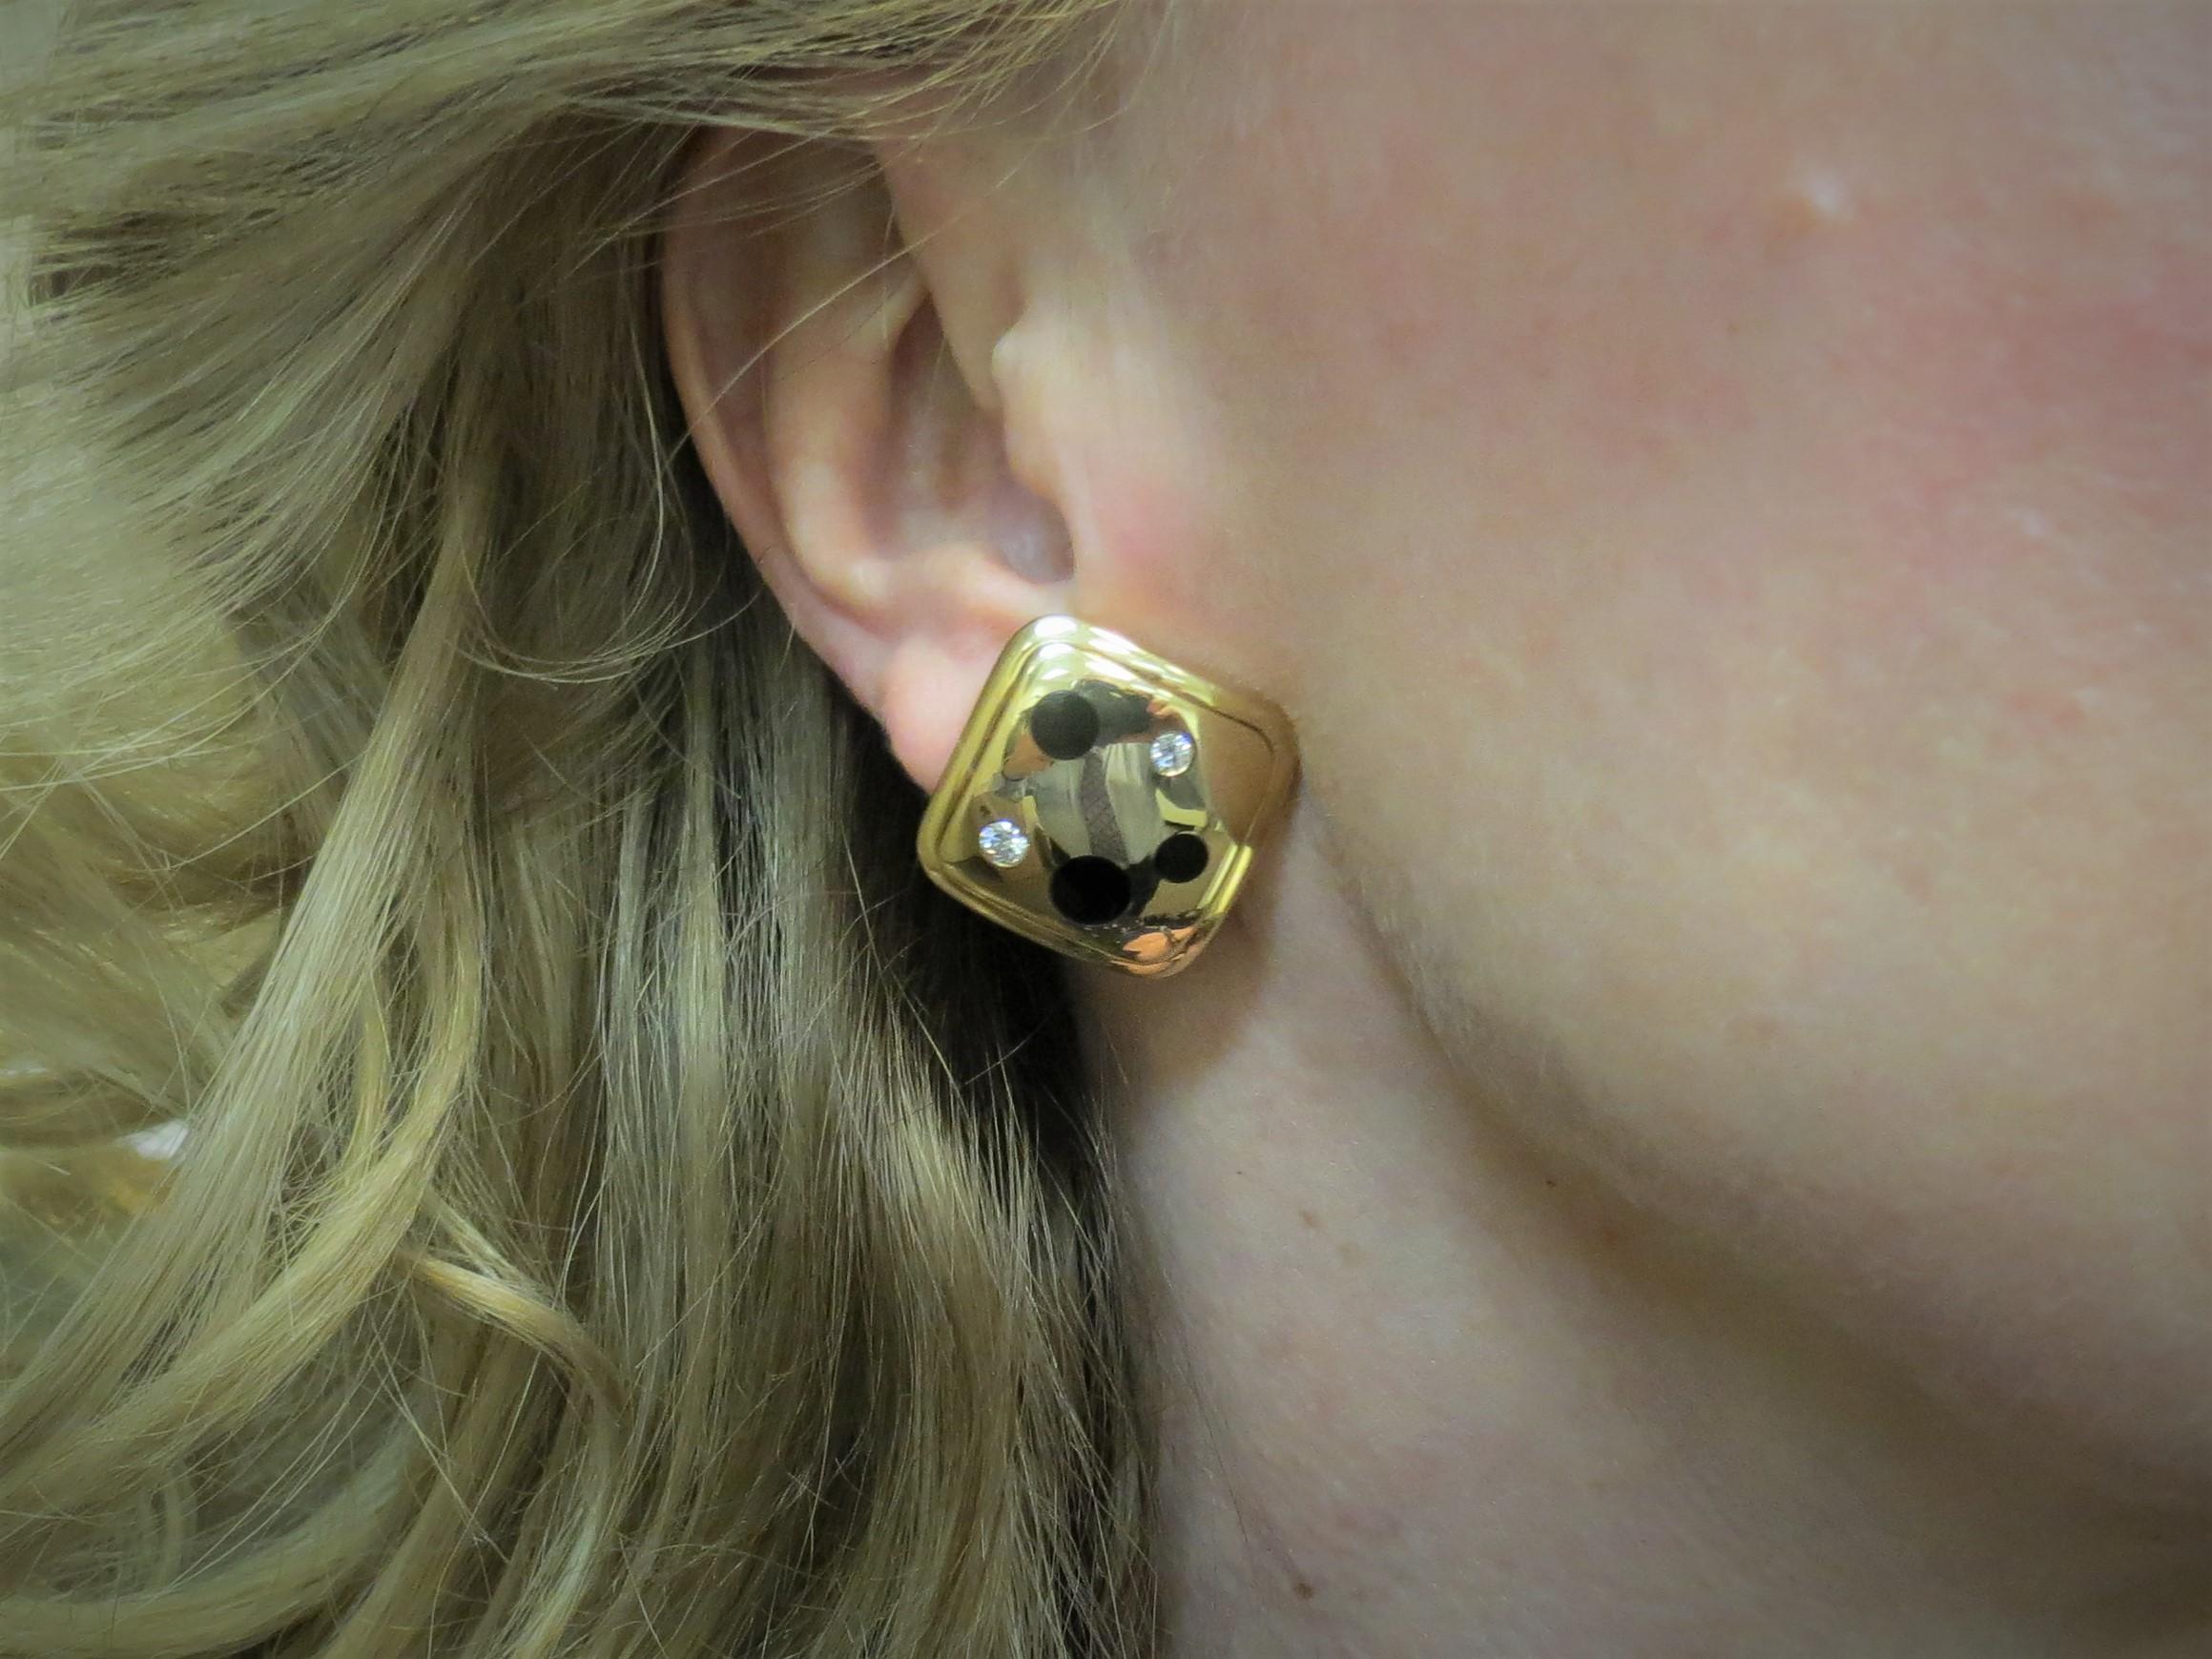 18K yellow gold earclips by Michael Bonanza, flush set with four full cut round diamonds weighing .32cts, G color, VS clarity, and black onyx circles.
Retail $6000